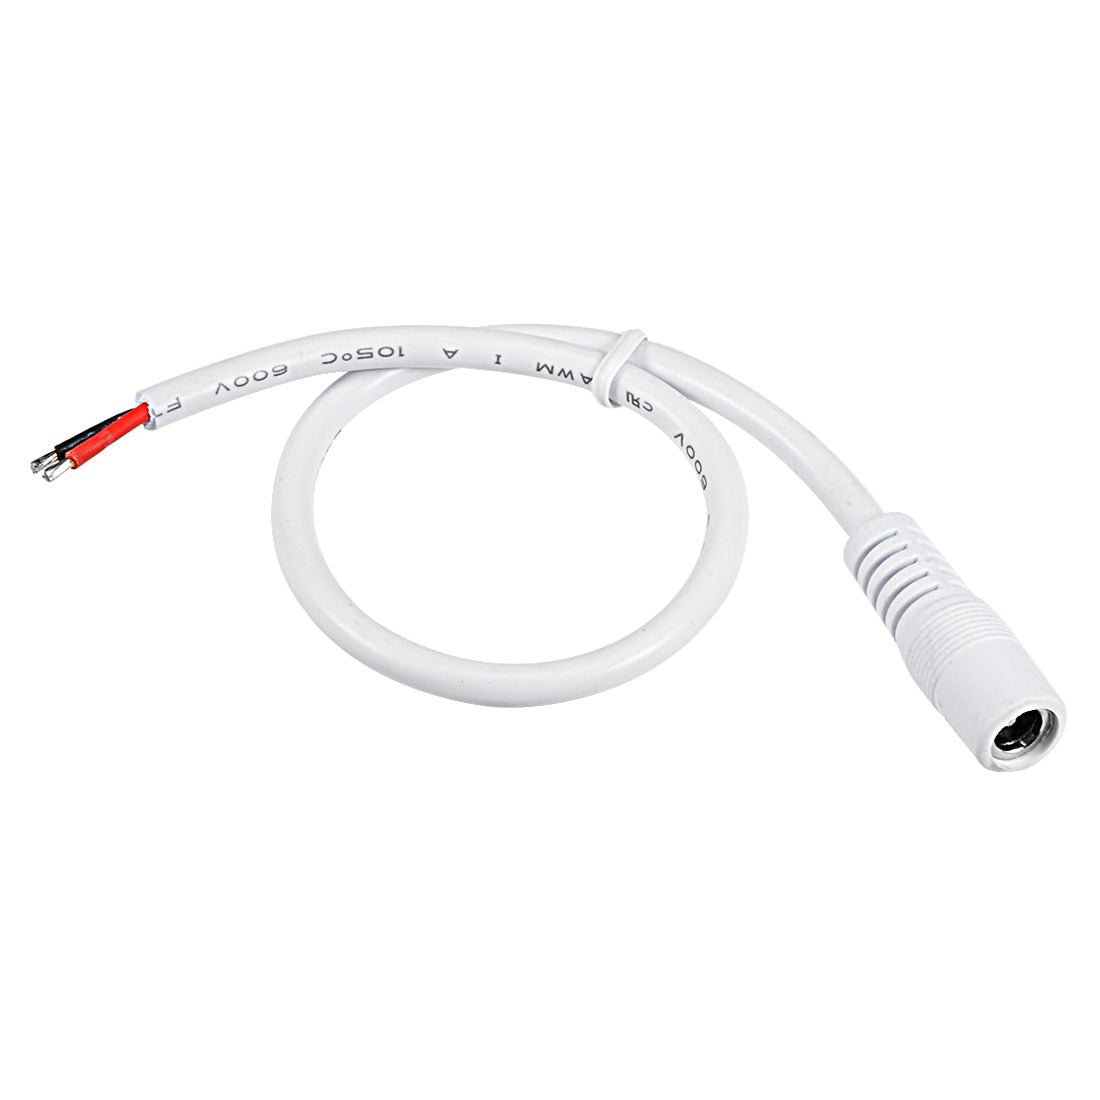 uxcell Uxcell 30cm Plastic Female DC Power Pigtail Cable Connector 18AWG 10A for CCTV Security Camera 2.1 x 5.5mm White